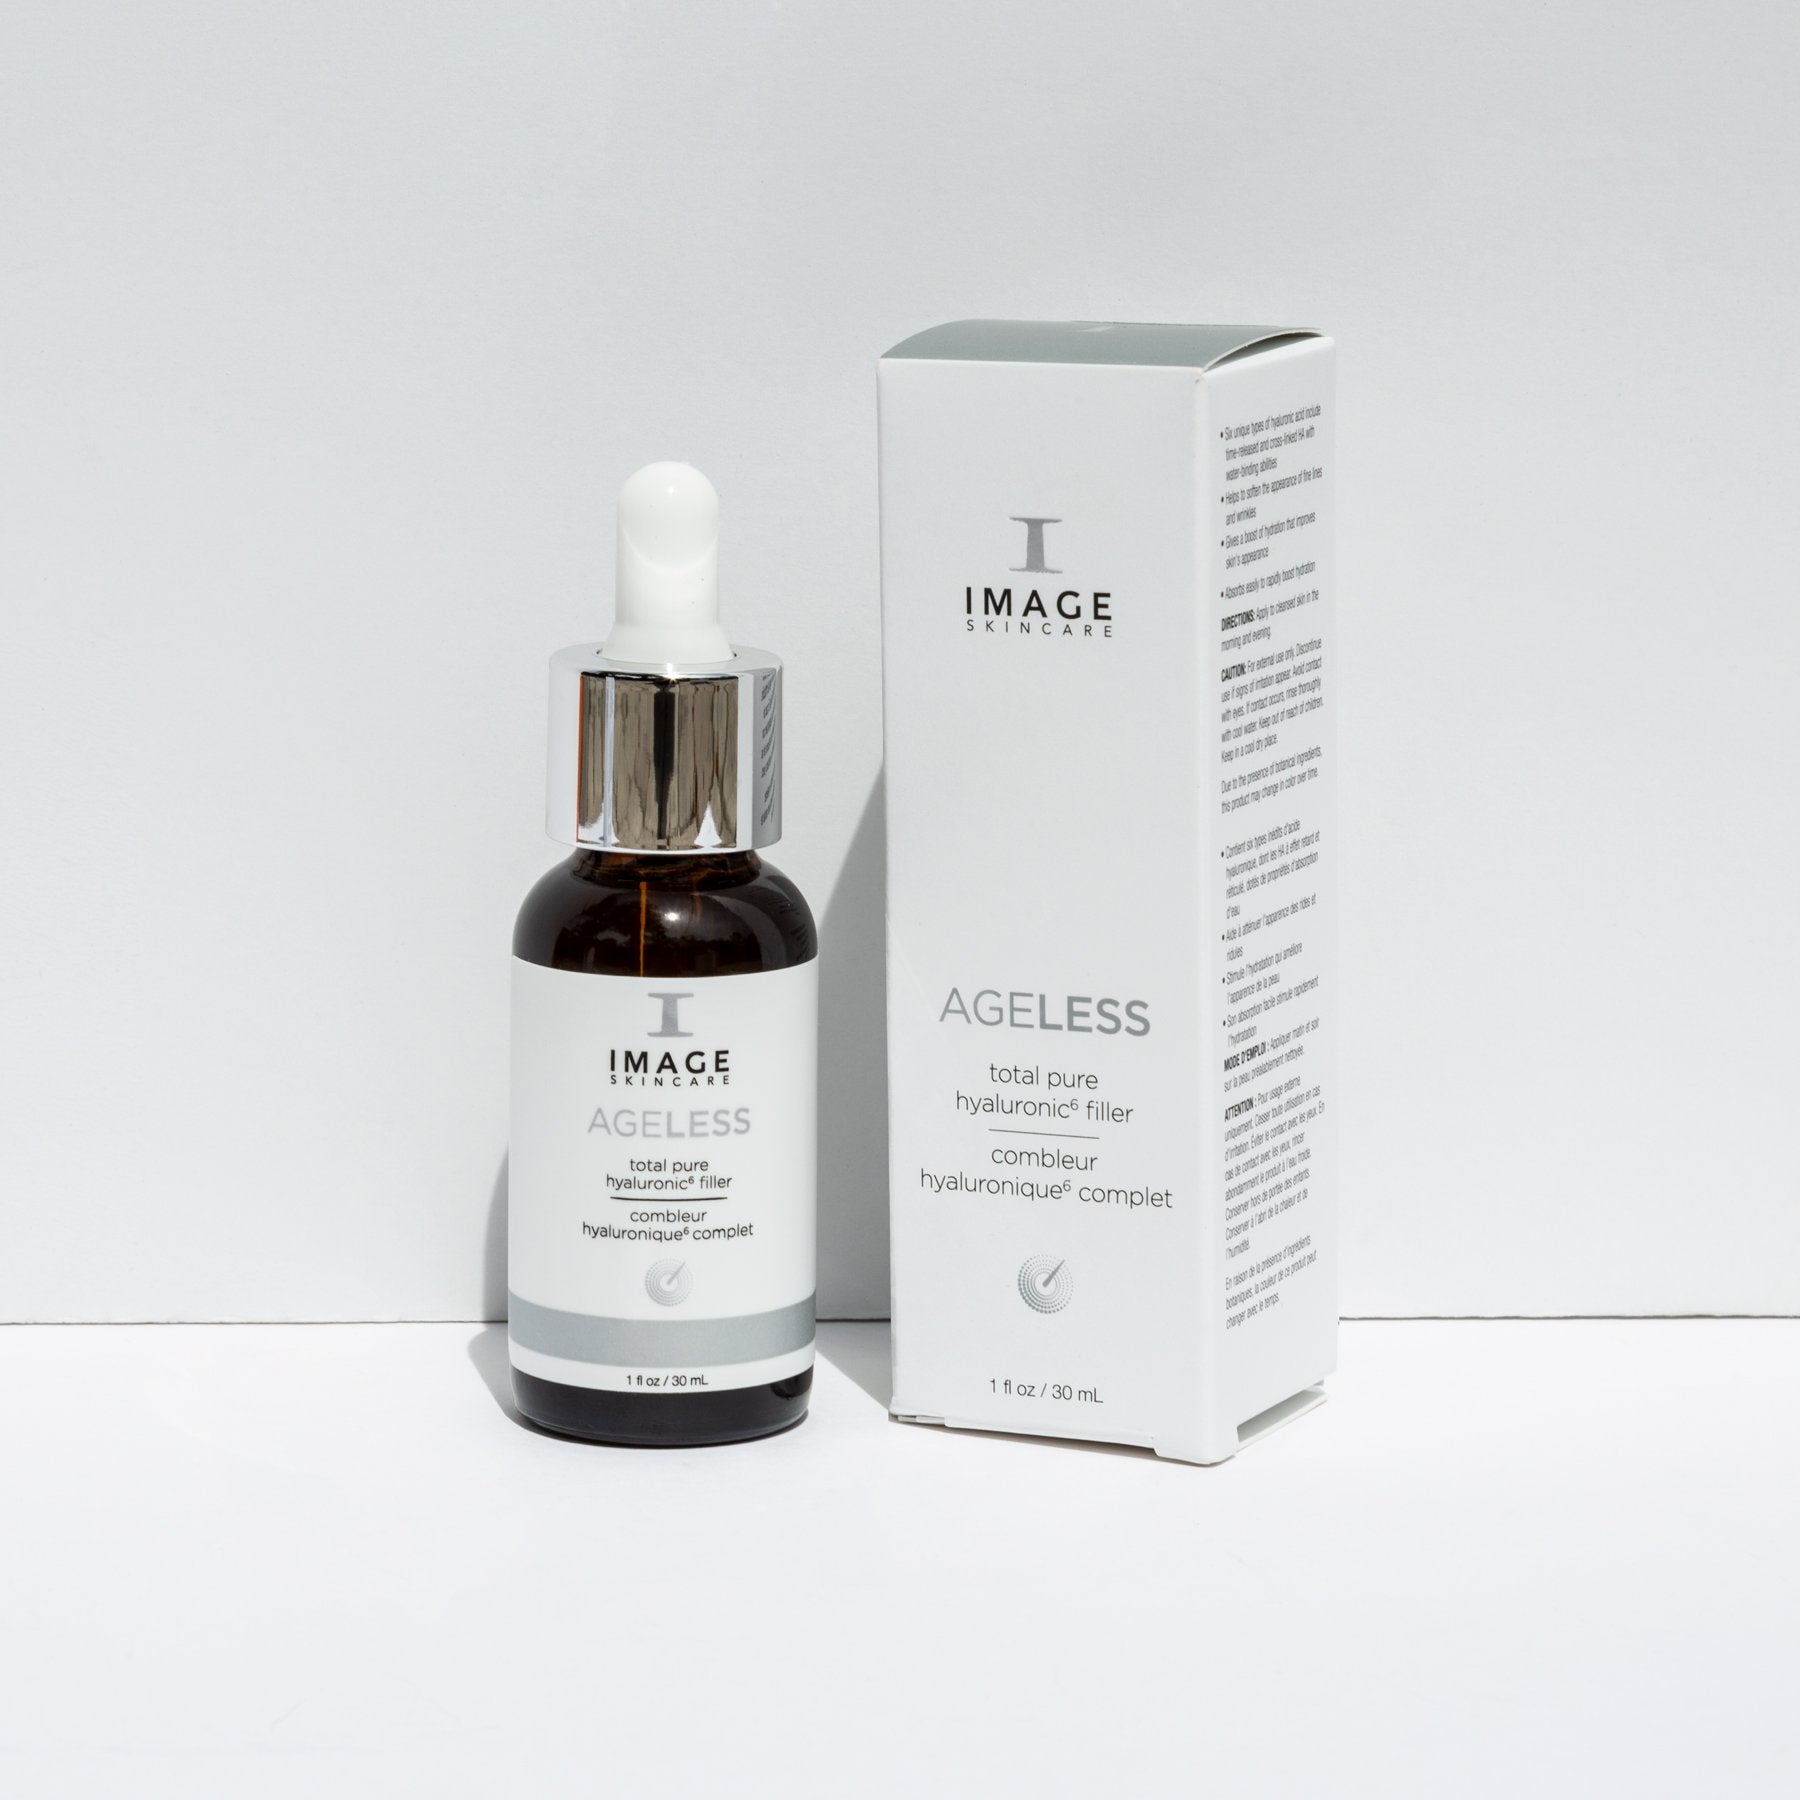 AGELESS total pure hyaluronic 6 filler | IMAGE Skincare